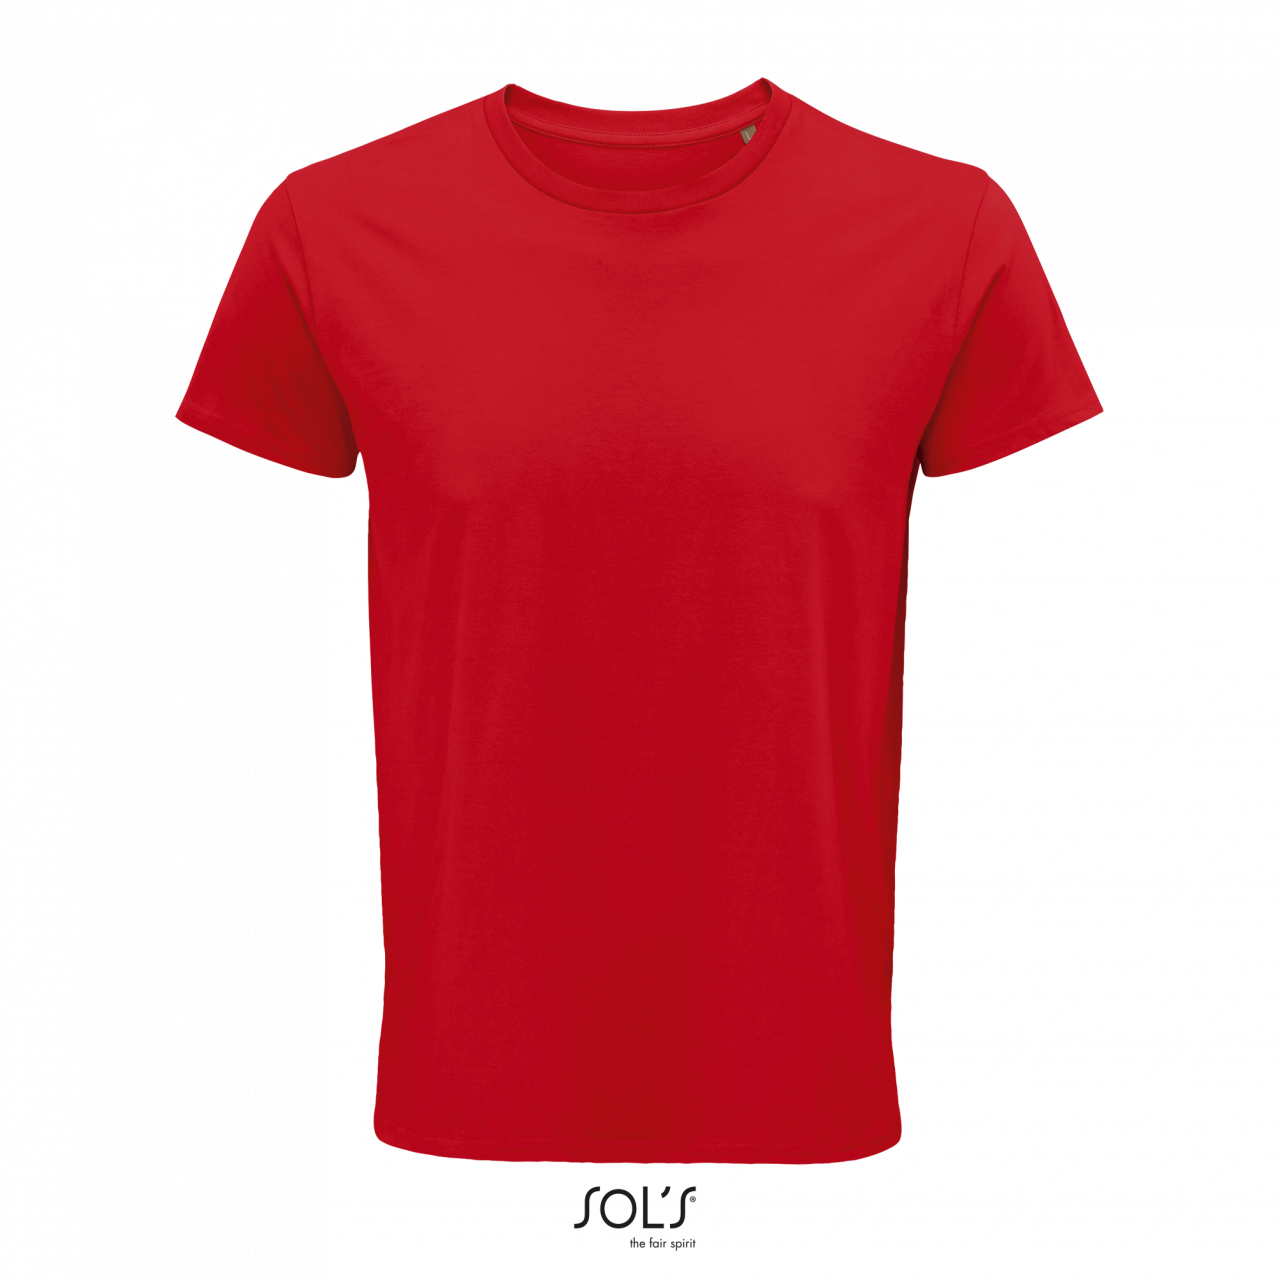 Sol's Crusader Men - Round-neck Fitted Jersey T-shirt - red